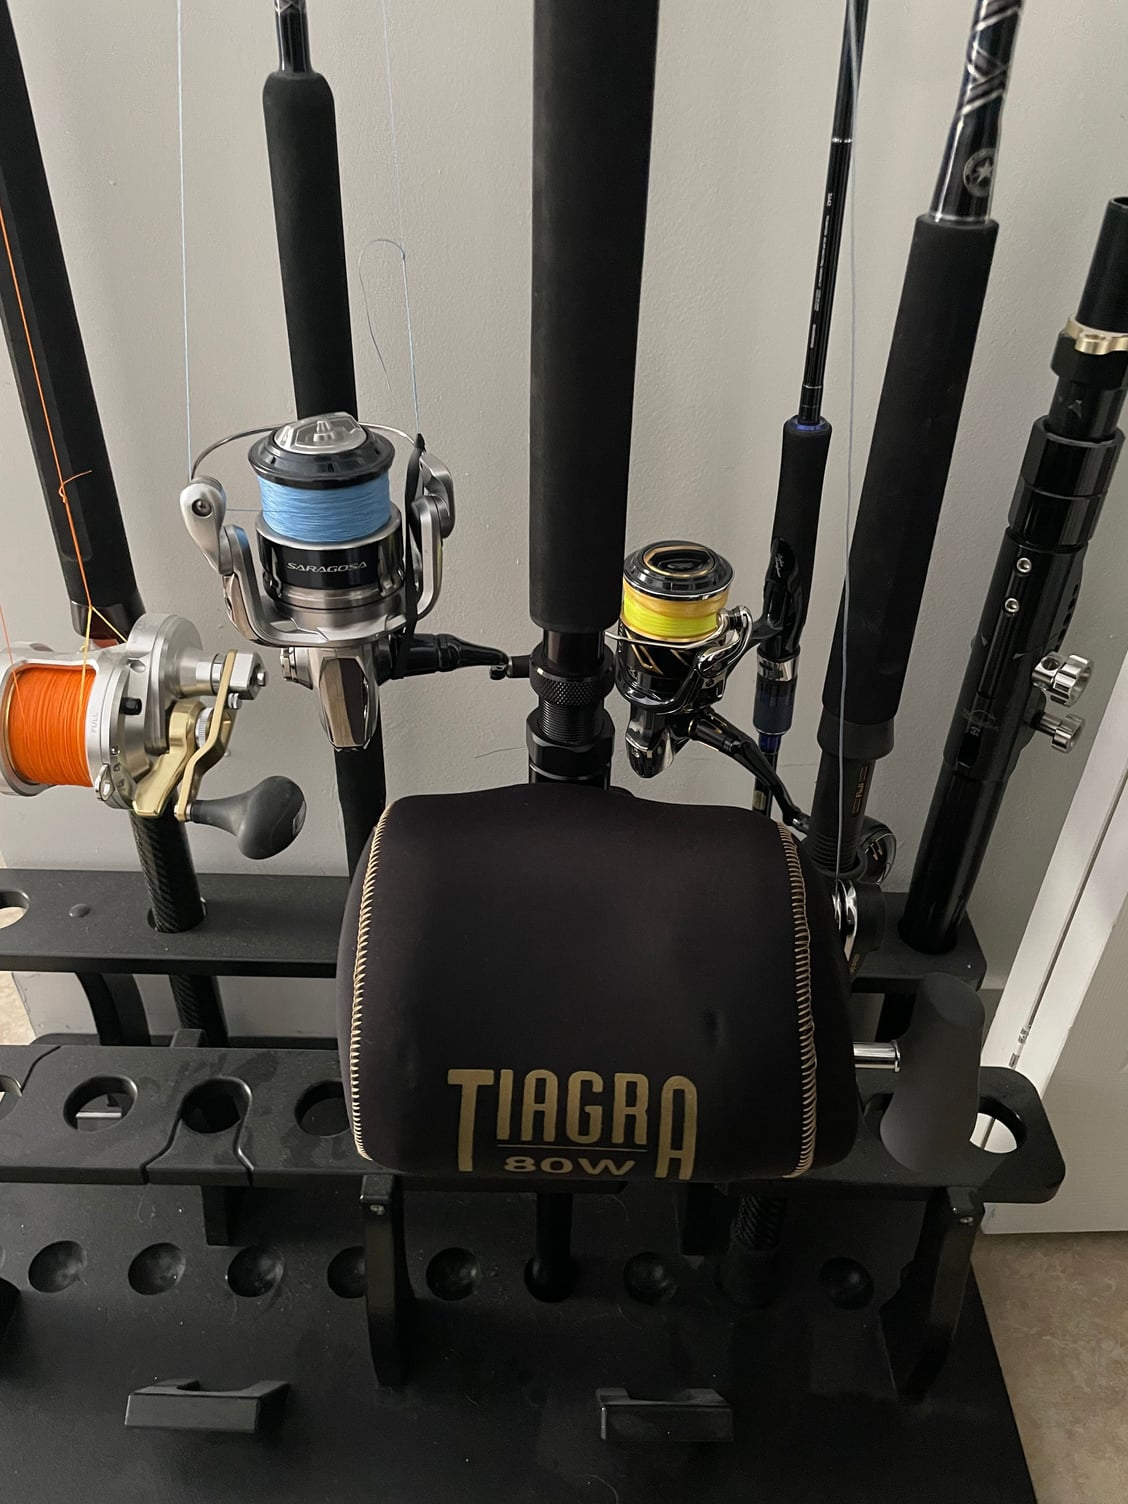 Tiagra 80w Custom rod/Winthrop butt - The Hull Truth - Boating and Fishing  Forum